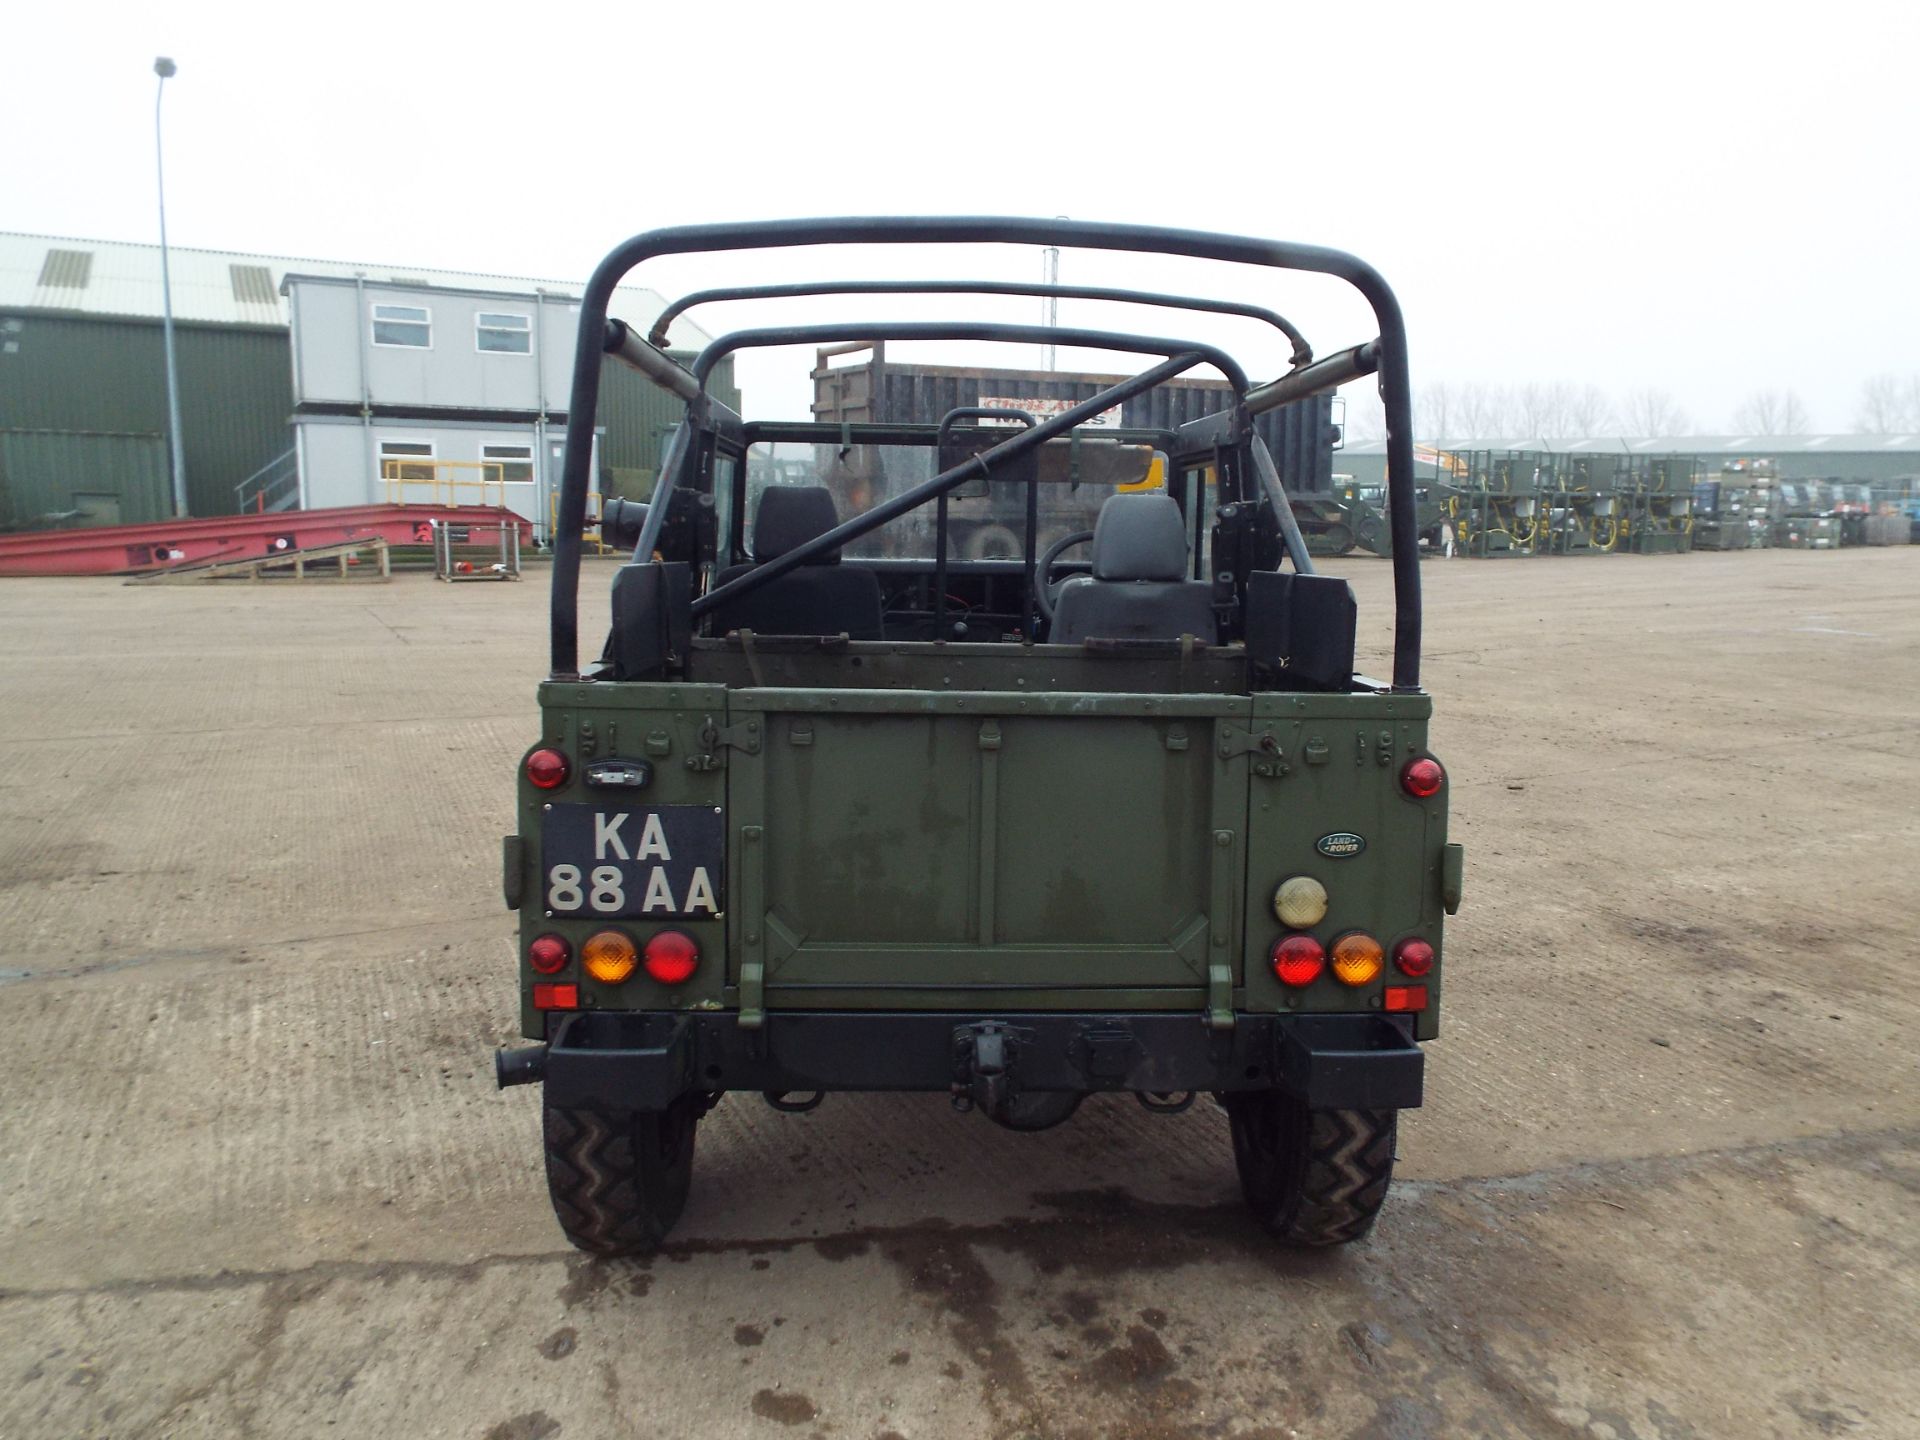 Military Specification Land Rover Wolf 90 Soft Top - Image 6 of 25